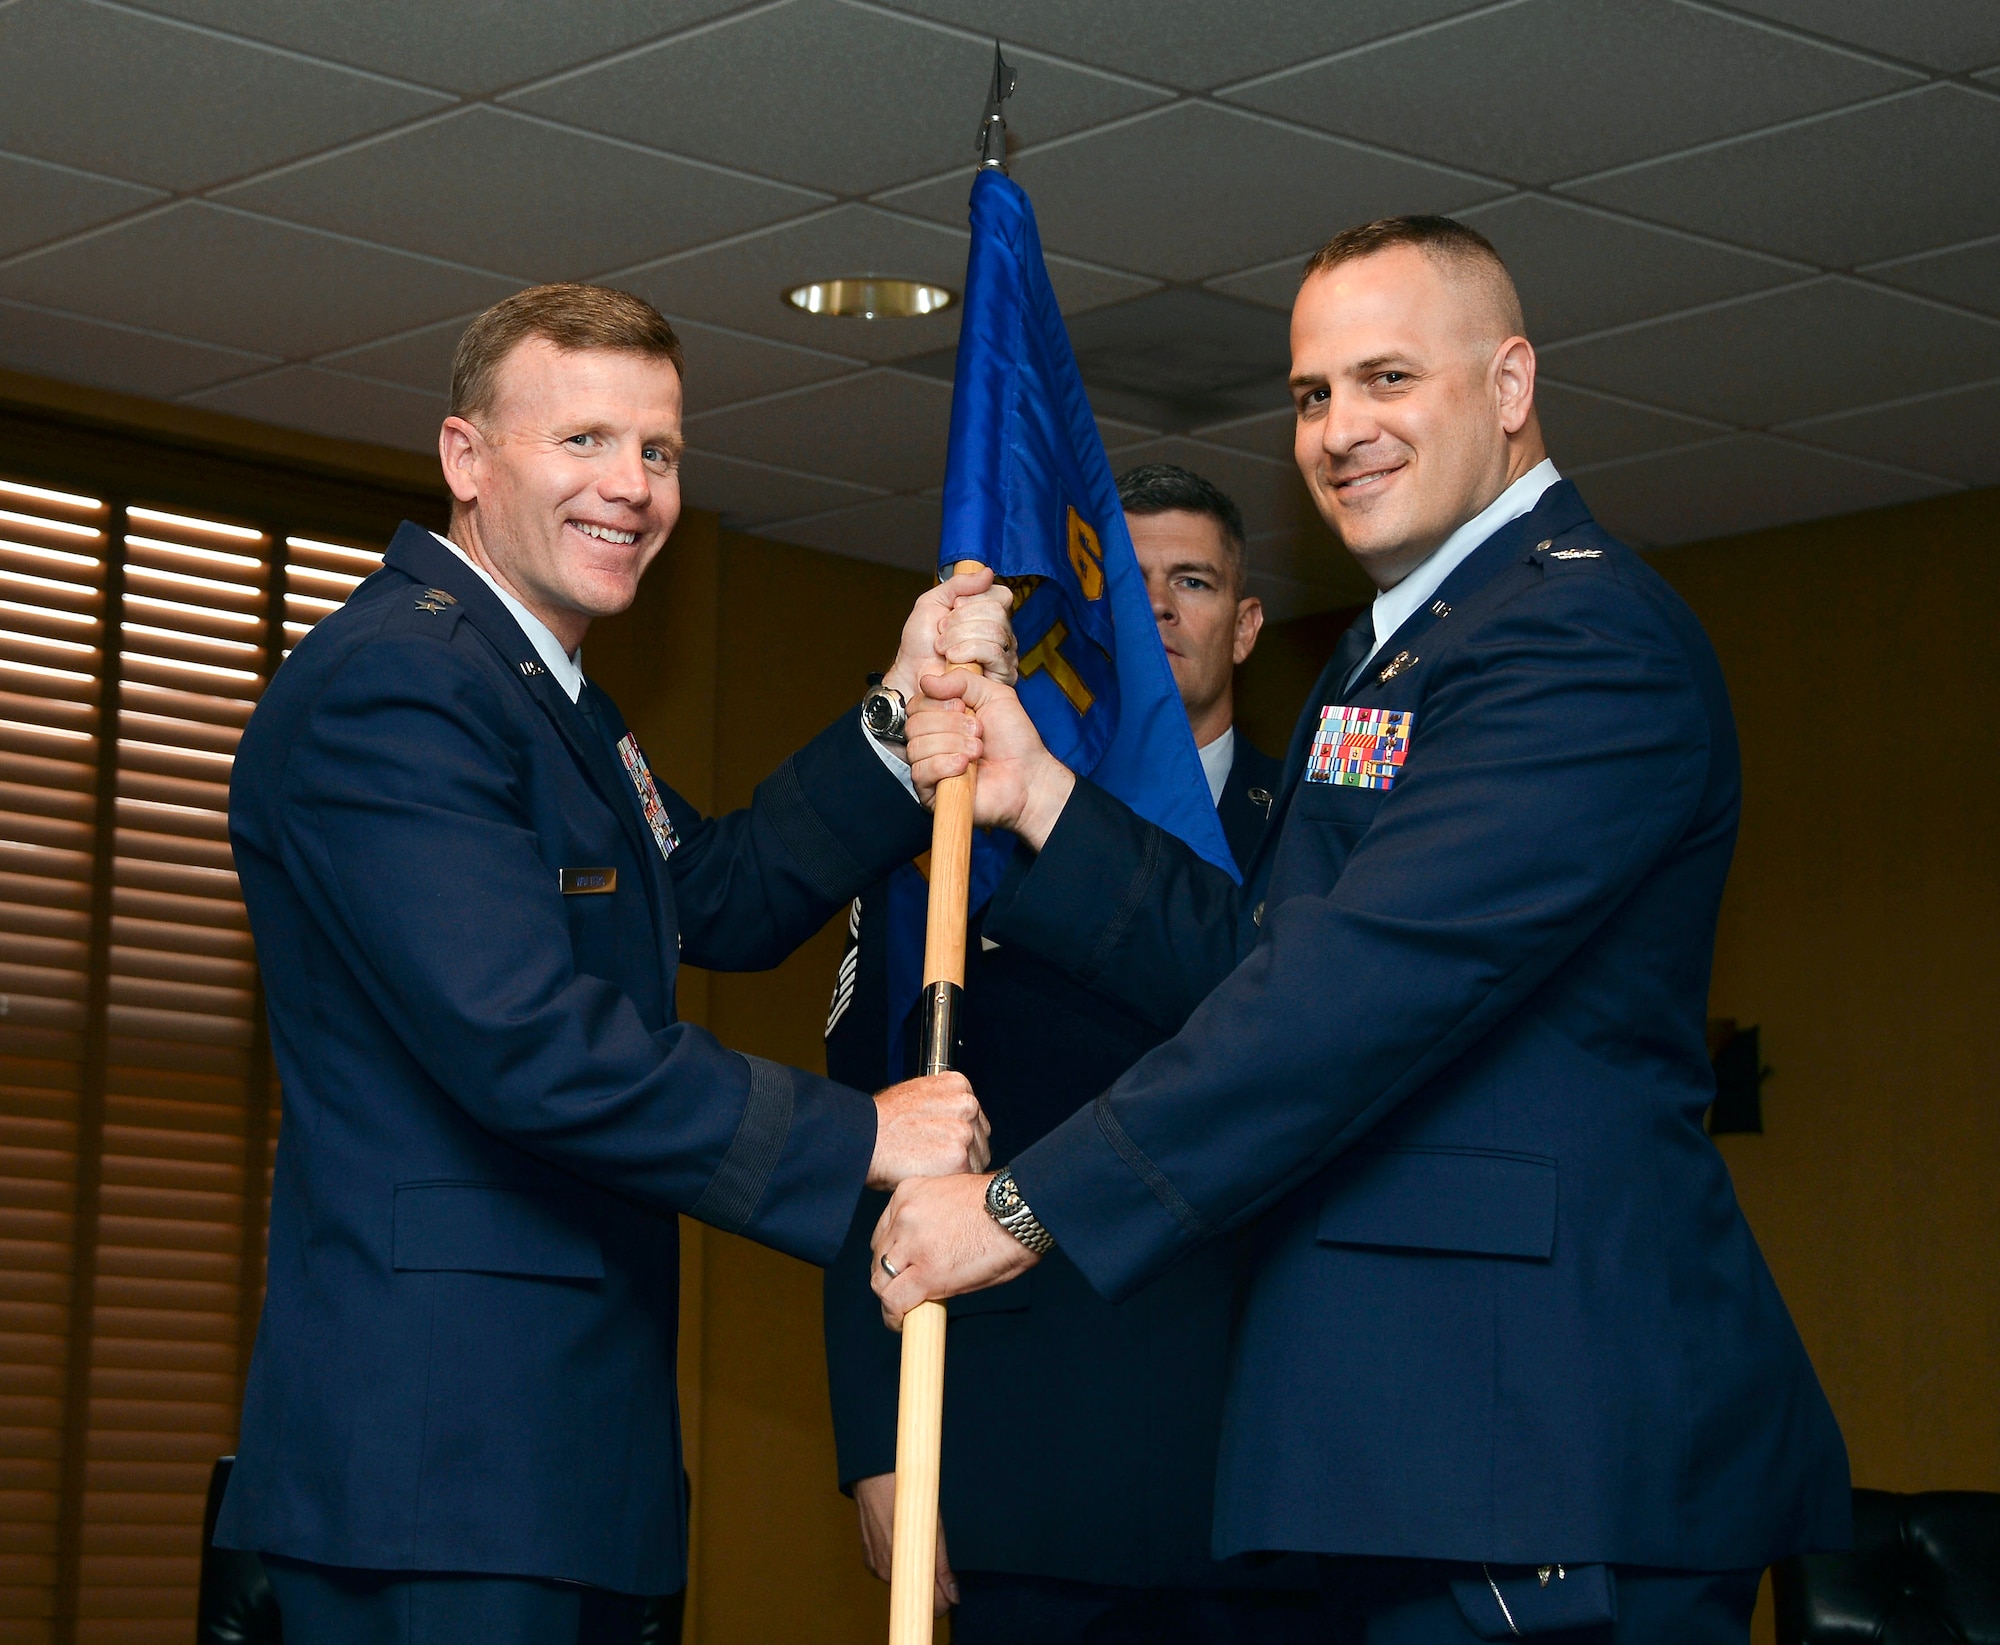 Lt. Gen. Tod Wolters, Commander 12th Air Force (Air Forces Southern) passes the squadron guideon to Col. James Sheedy during the 612th Theater Operations Group Change of Command Ceremony on Davis-Monthan AFB, Ariz., June 17, 2014.  Sheedy assumed command of the 612 TOG from Col. Jonathan VanNoord. (U.S. Air Force photo by Tech. Sgt. Heather R. Redman/Released)